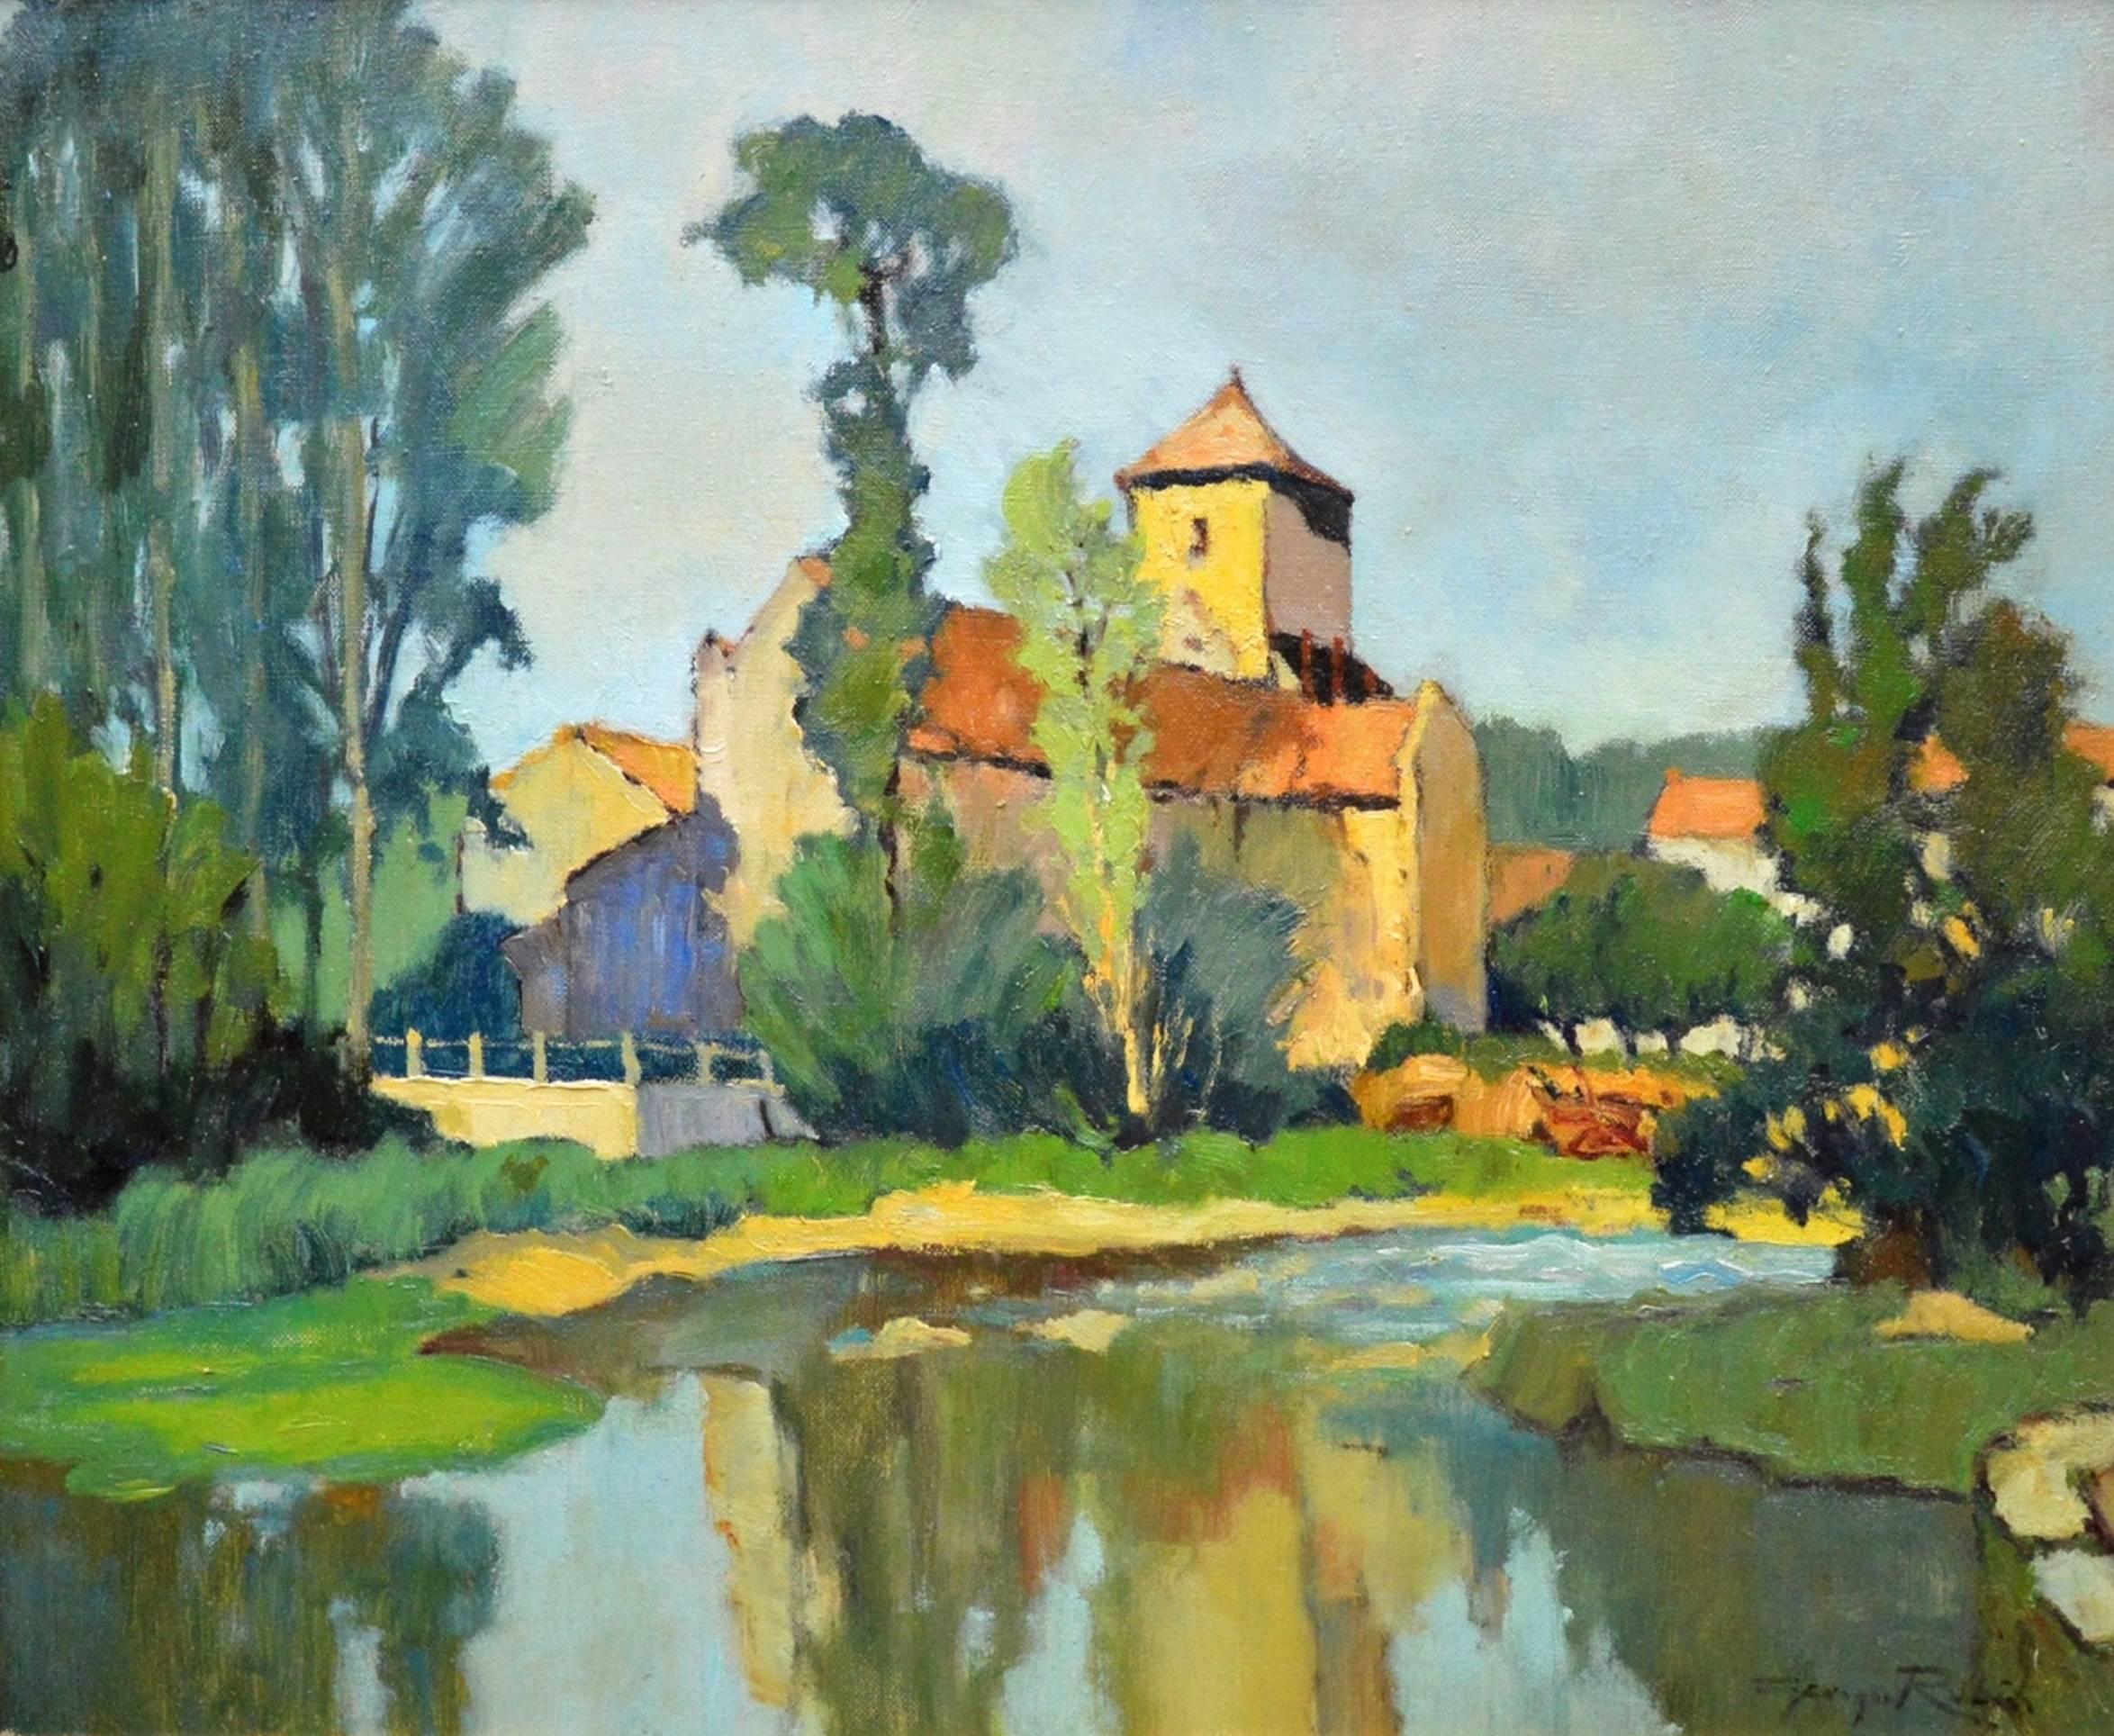 This is a fine original French Post-Impressionist oil on canvas depicting a view of the village of ‘Saint-Macoux’ on the River Charente in the Vienne department of Western France by the eminent Post-Impressionist painter Georges Charles Robin